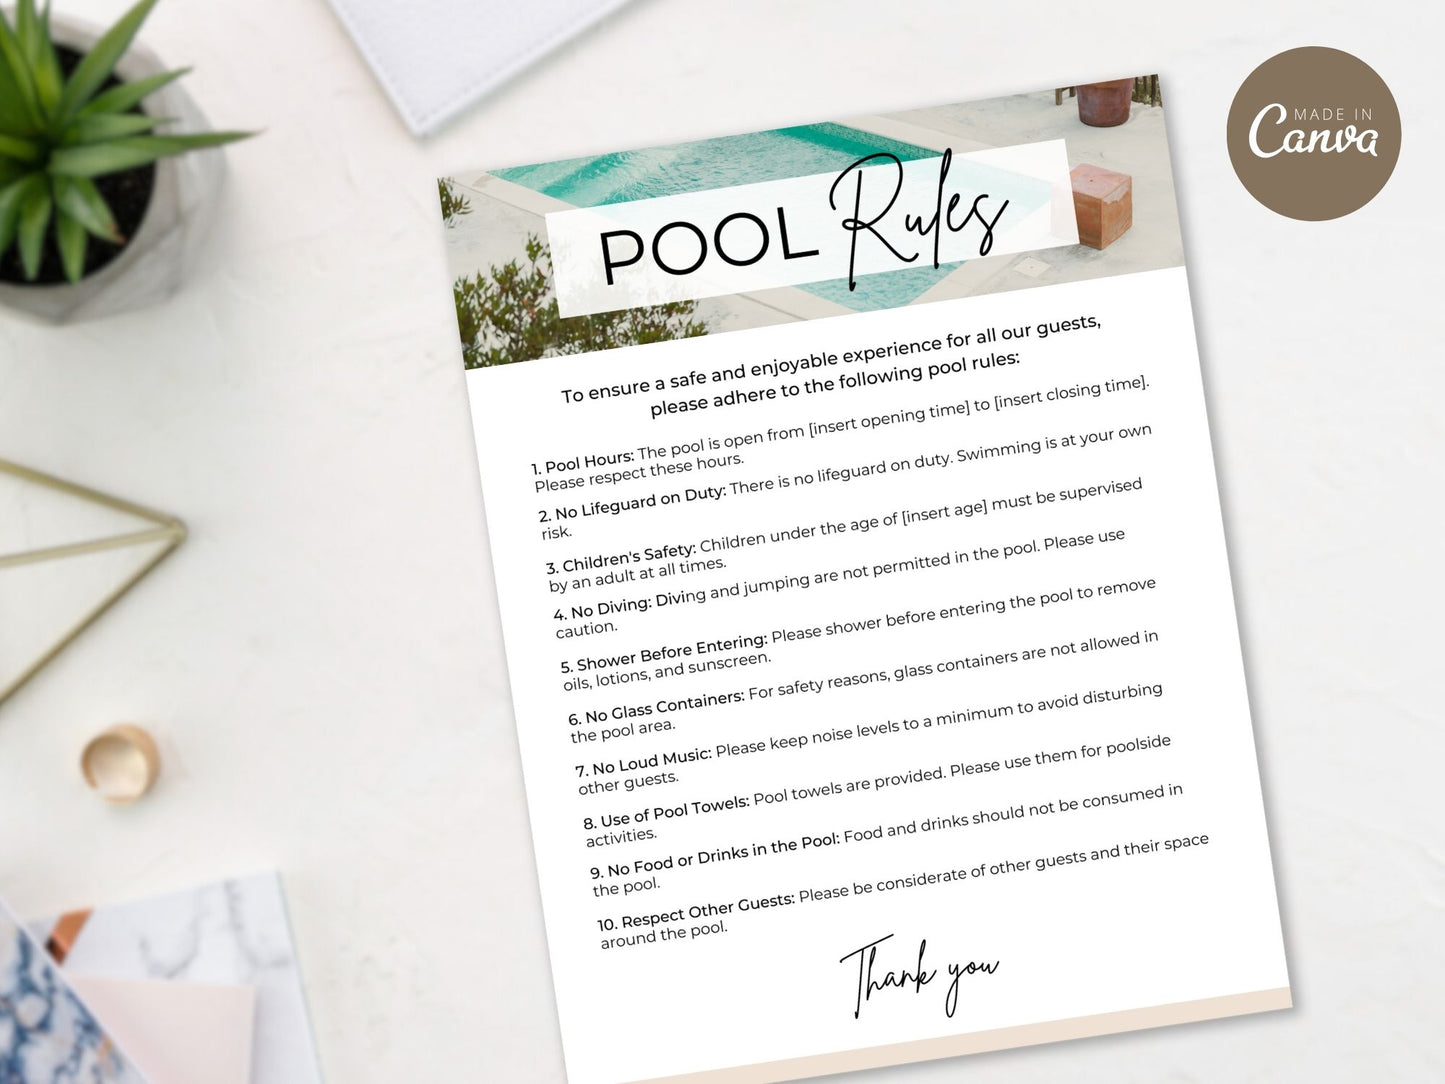 Pool Rules Airbnb Sign - Clear and visually appealing template for vacation rental pool guidelines.